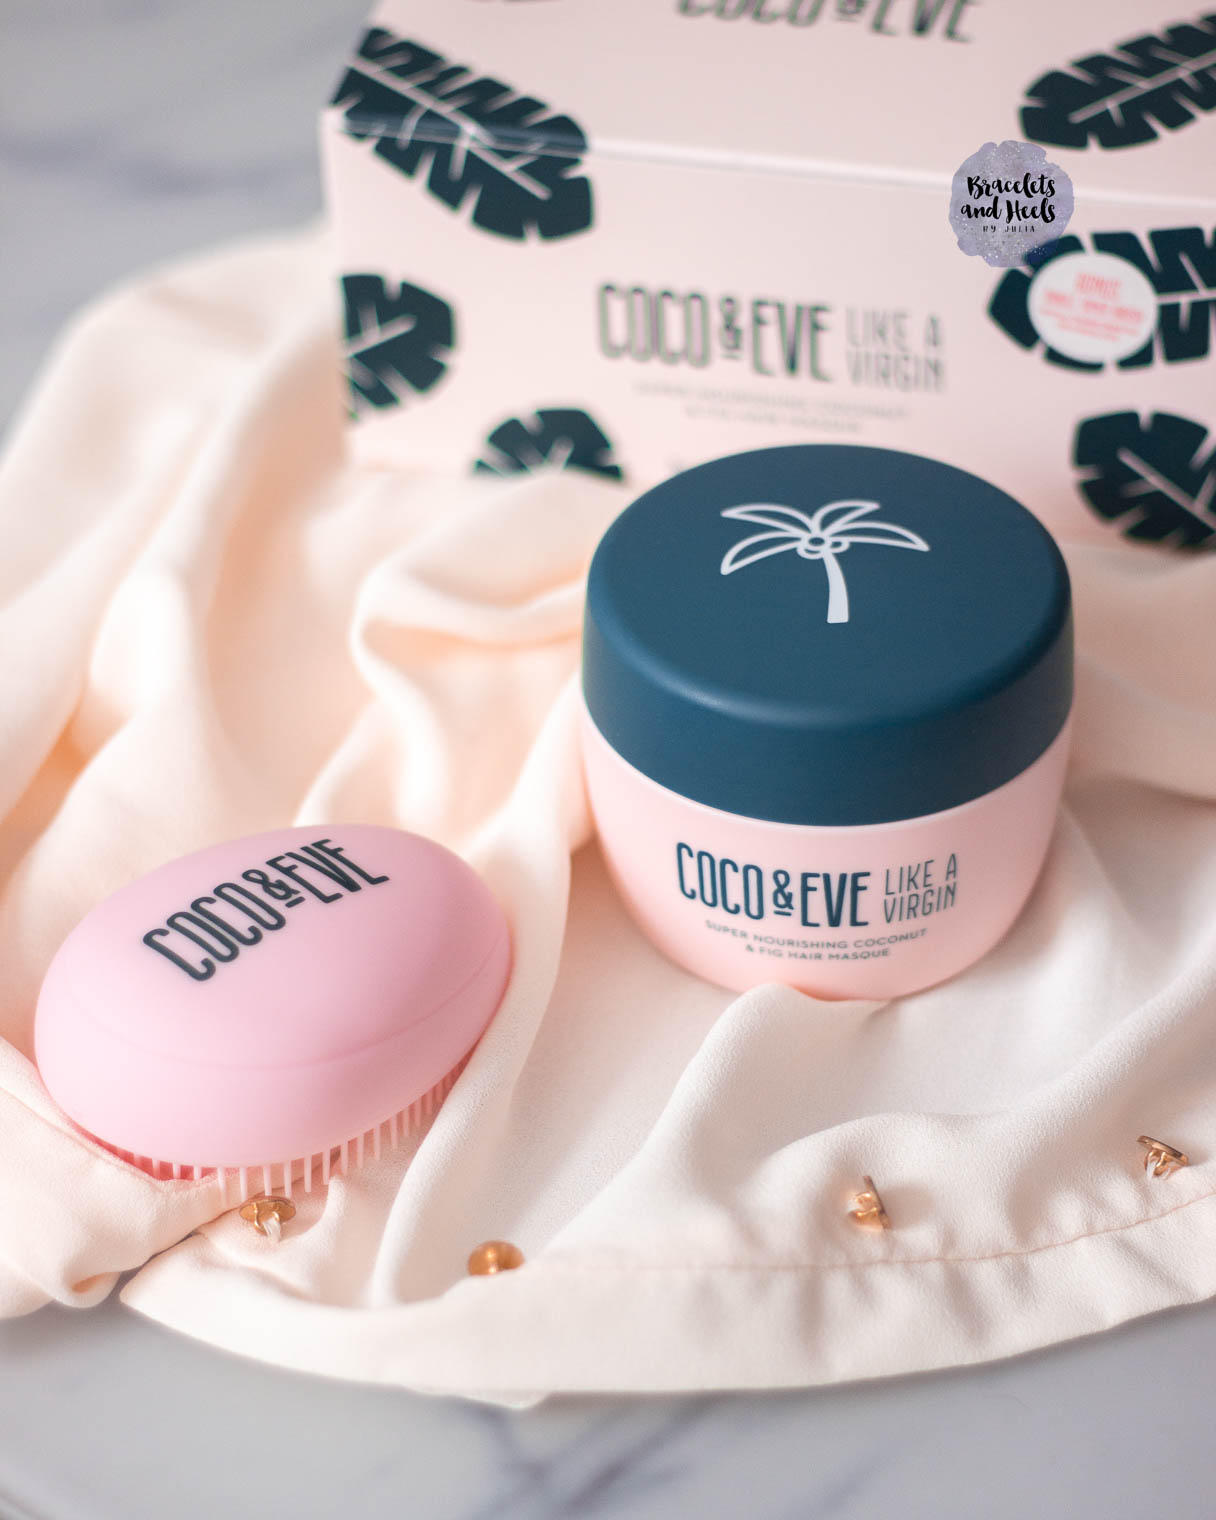 Coco & Eve Hair Mask: Worth the hype? - Oh Jules